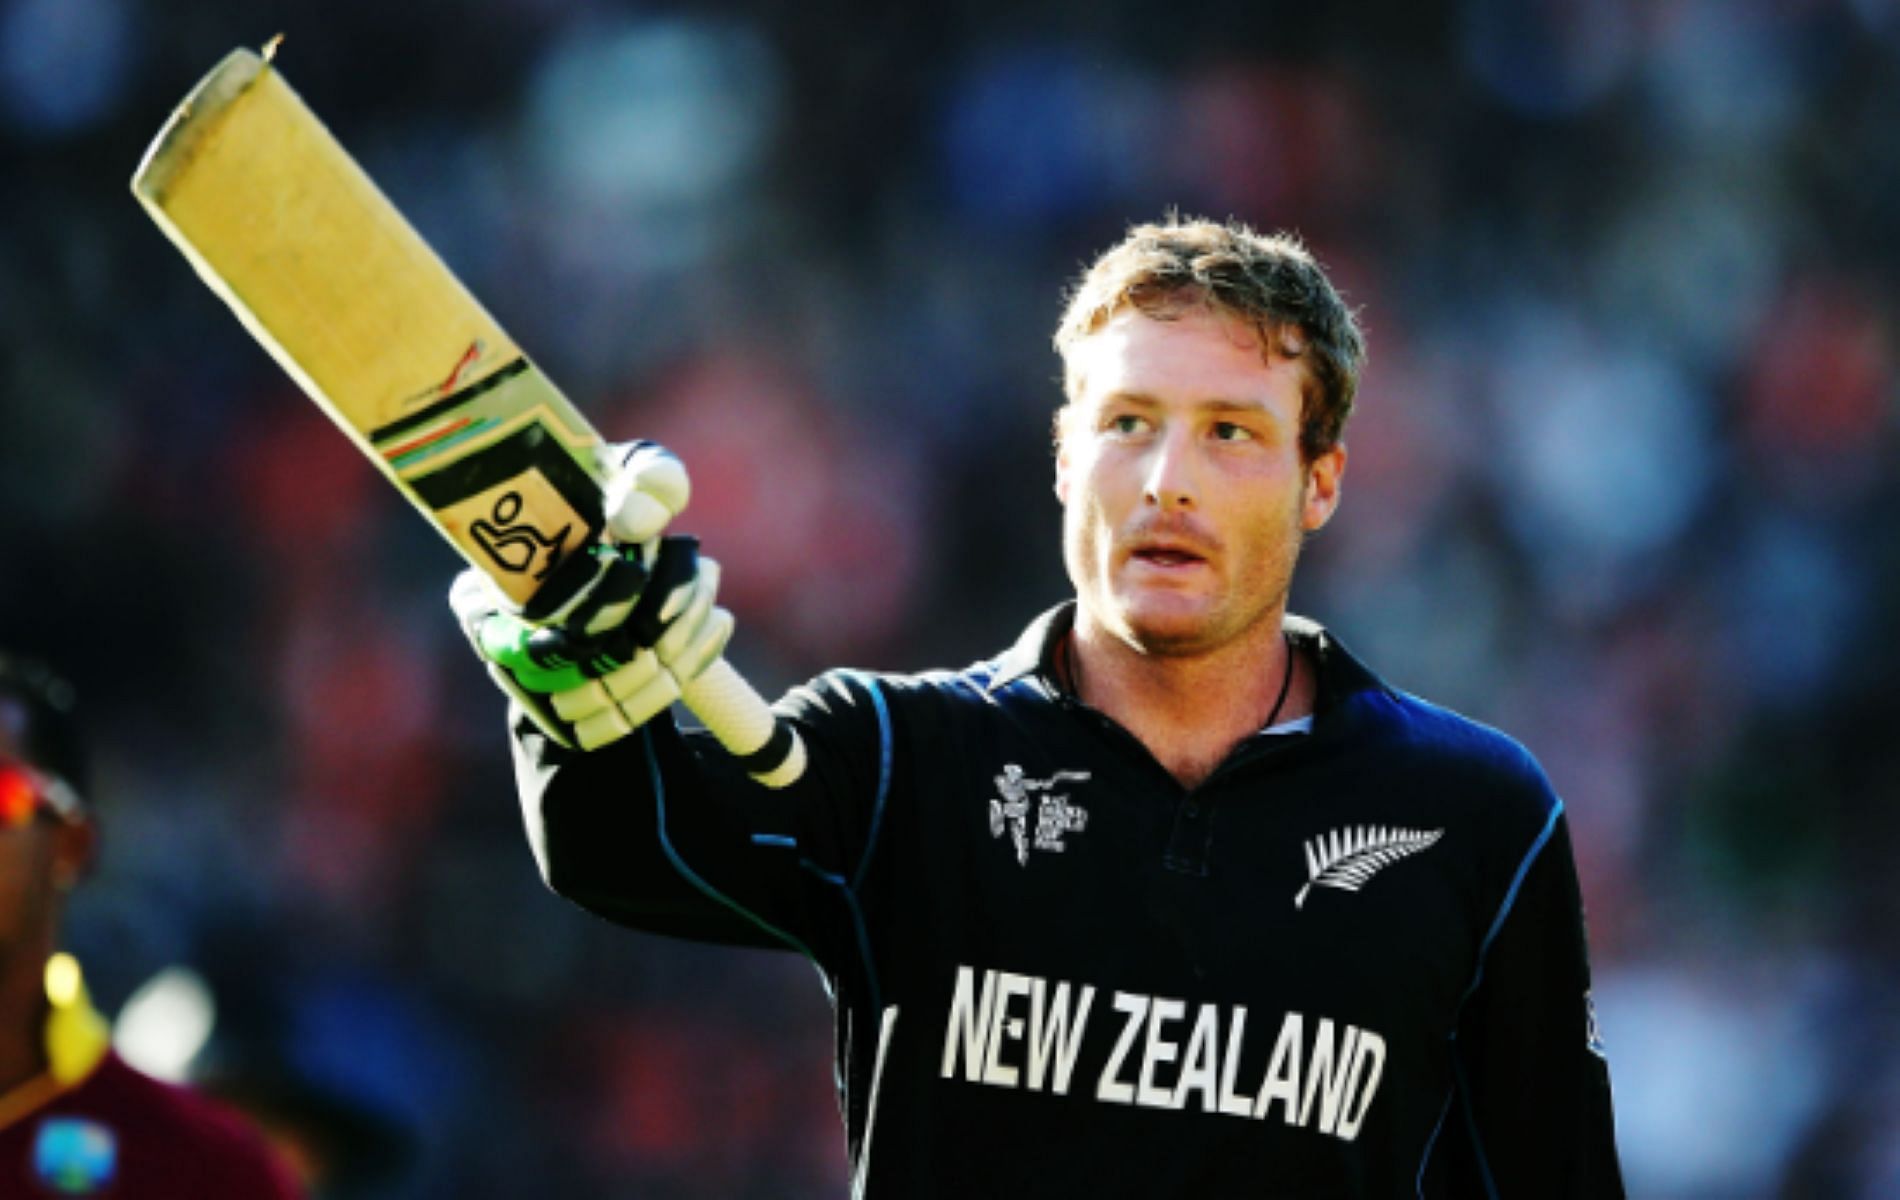 Guptil scored a brilliant double-century in New Zealand's 2015 World Cup quarter-final win.